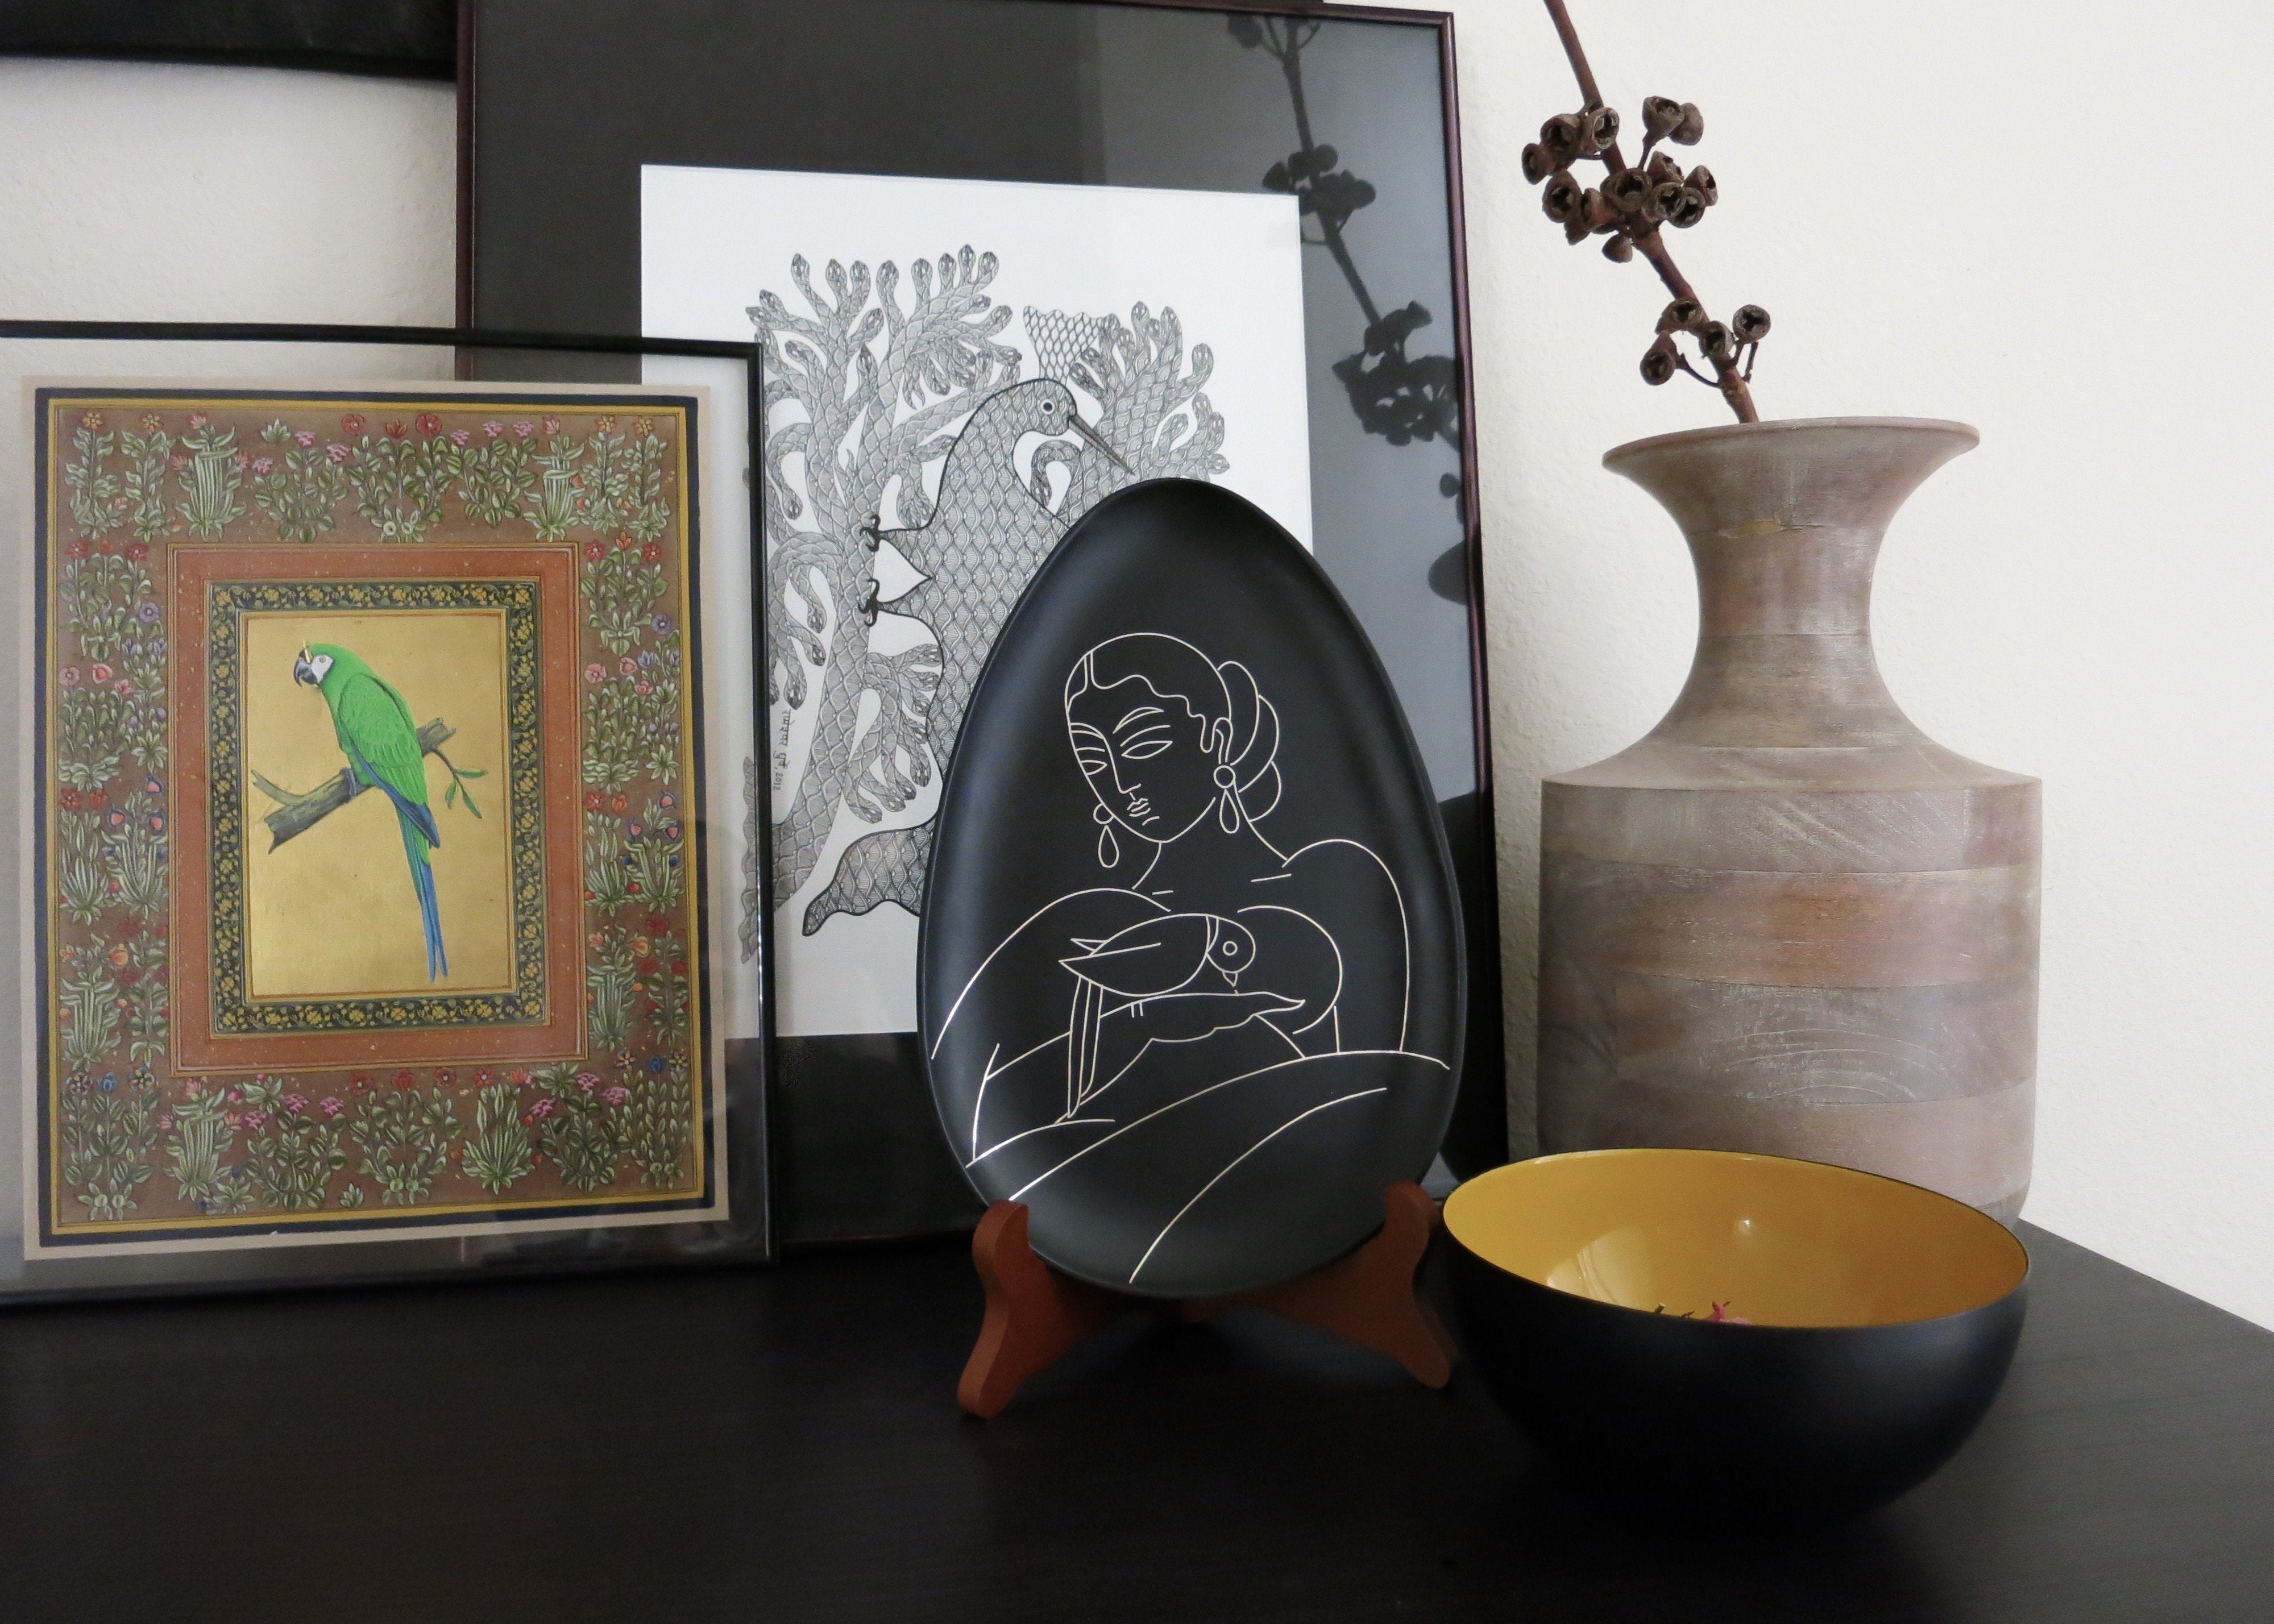 Decorative plates for home decor. Bidri metal and silver teardrop-shaped plate. Lady with a parrot. Design led, luxe, handmade home decor art objects. Handmade in India by Lai and Craft Stories